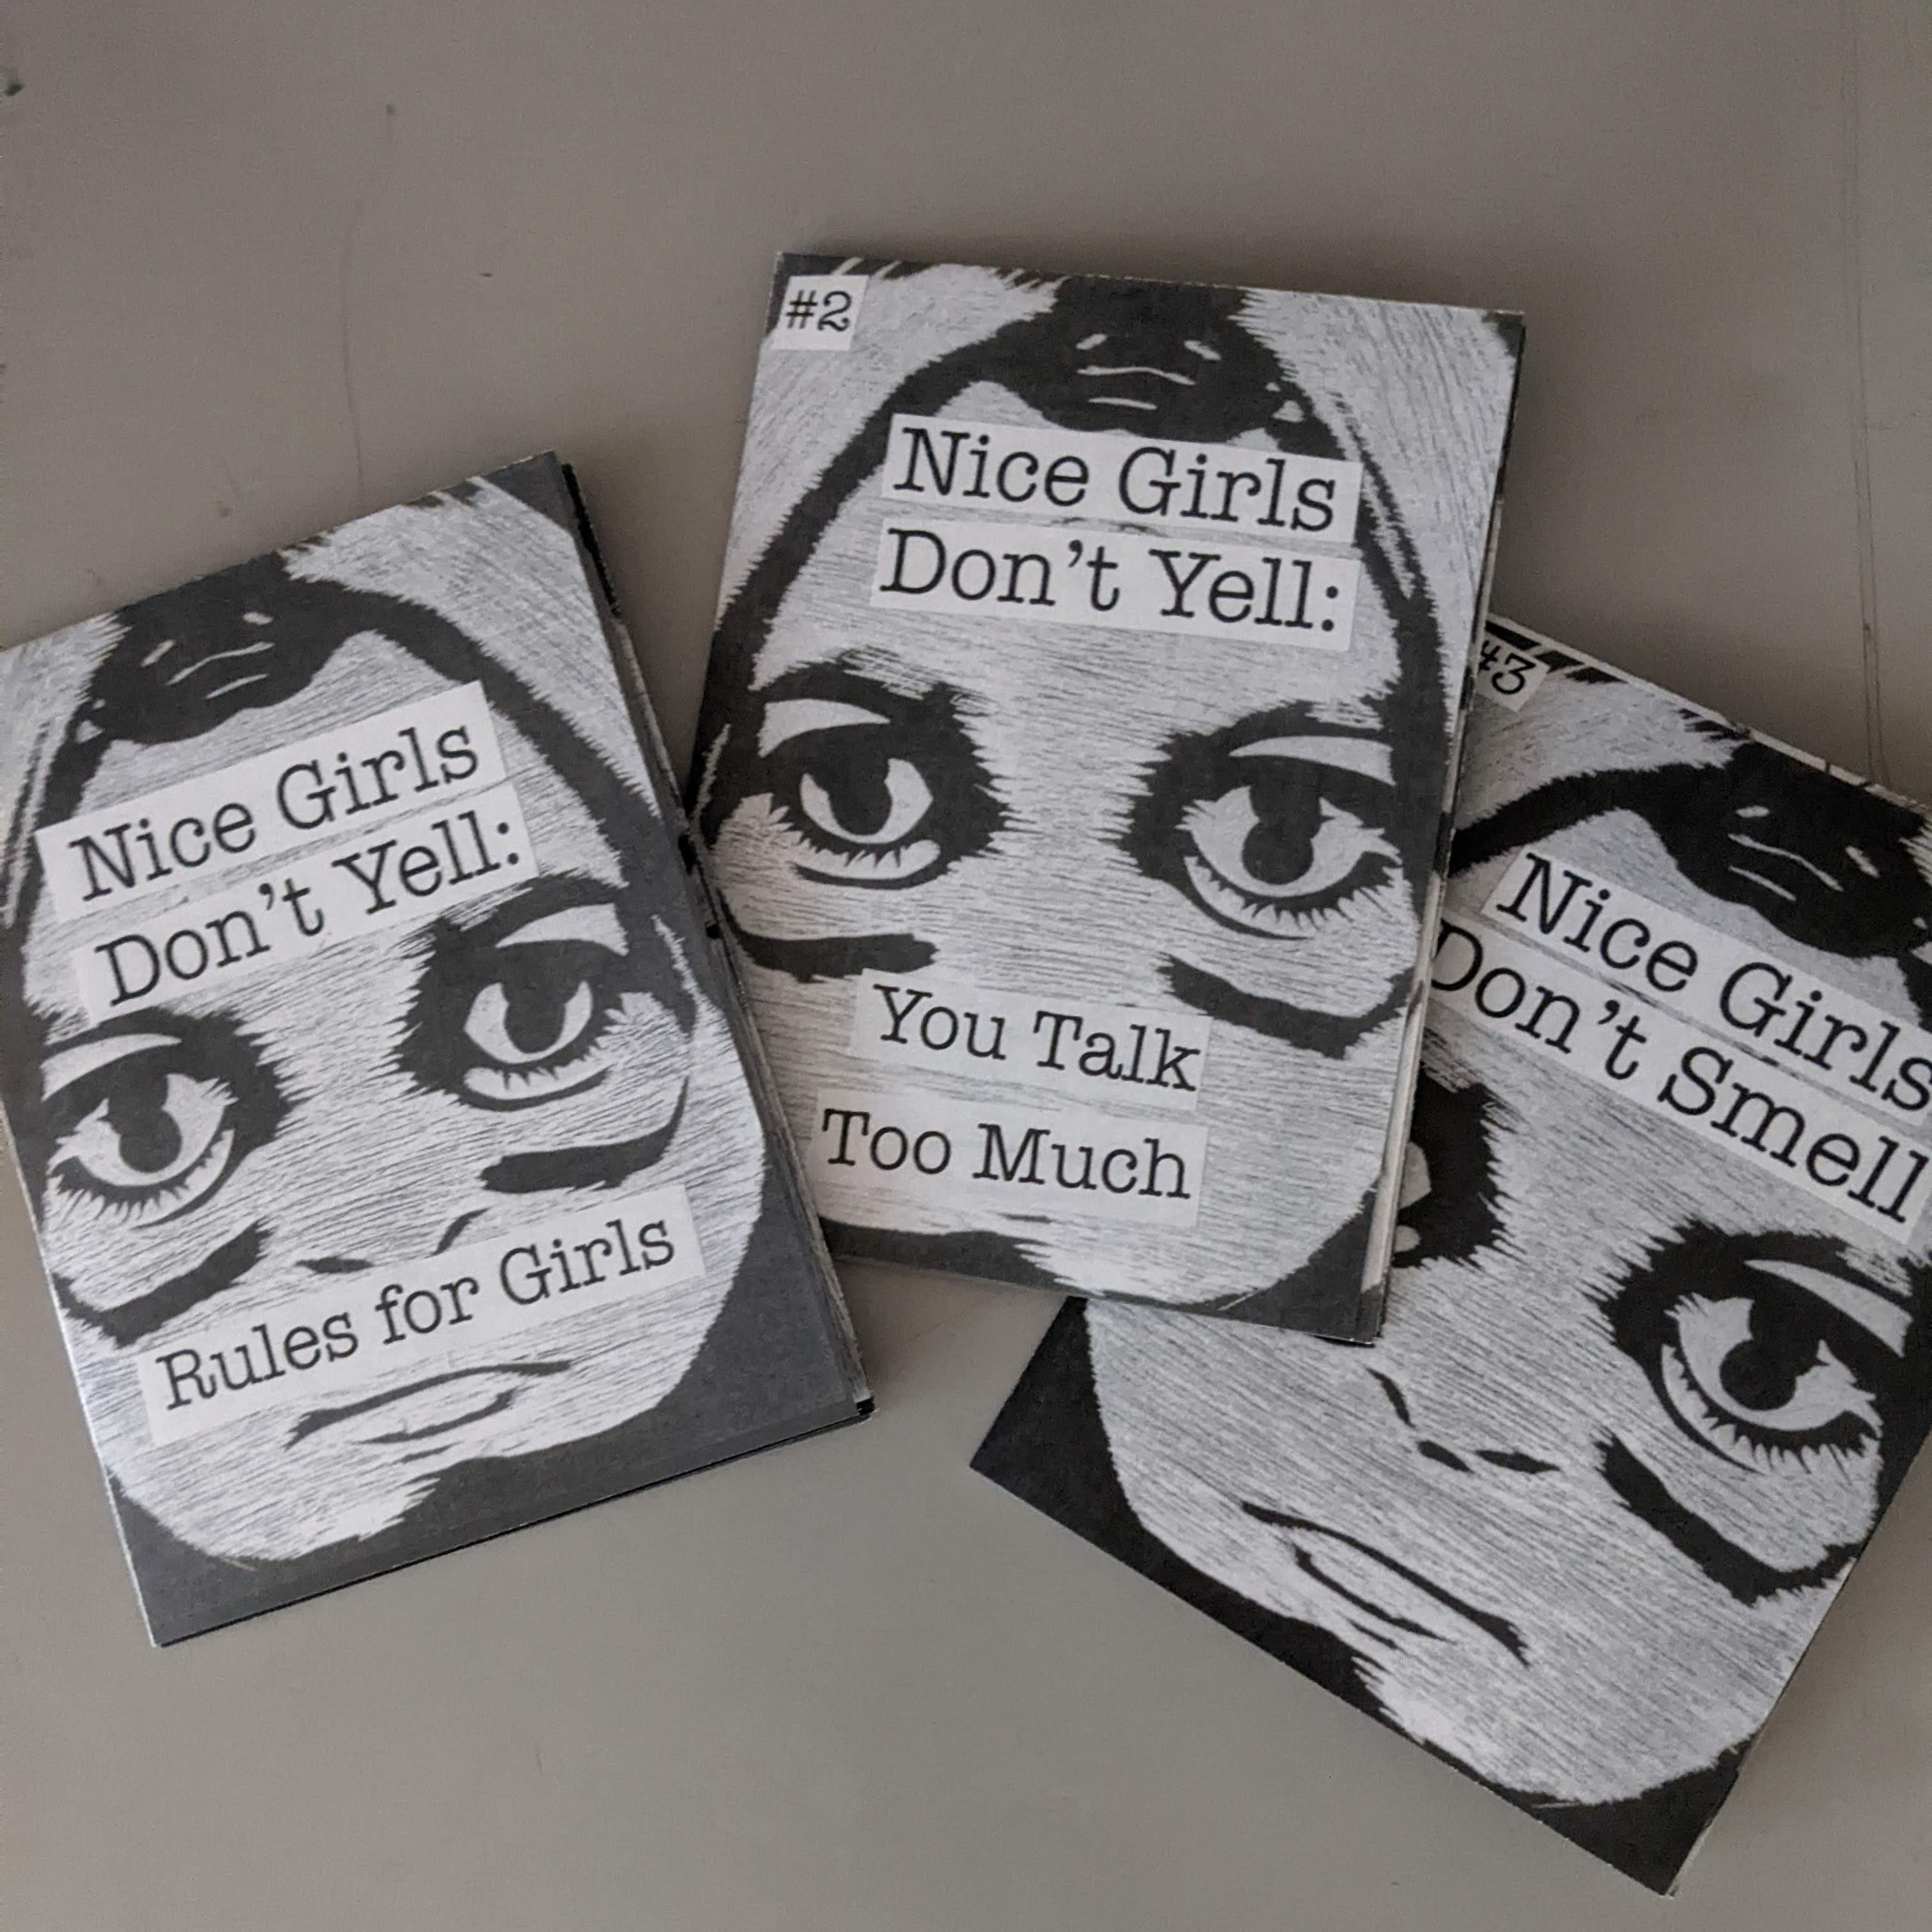 Three black and white zines from Laura Chenault's Nice Girls Don't Yell series in celebration of International Zine Month.